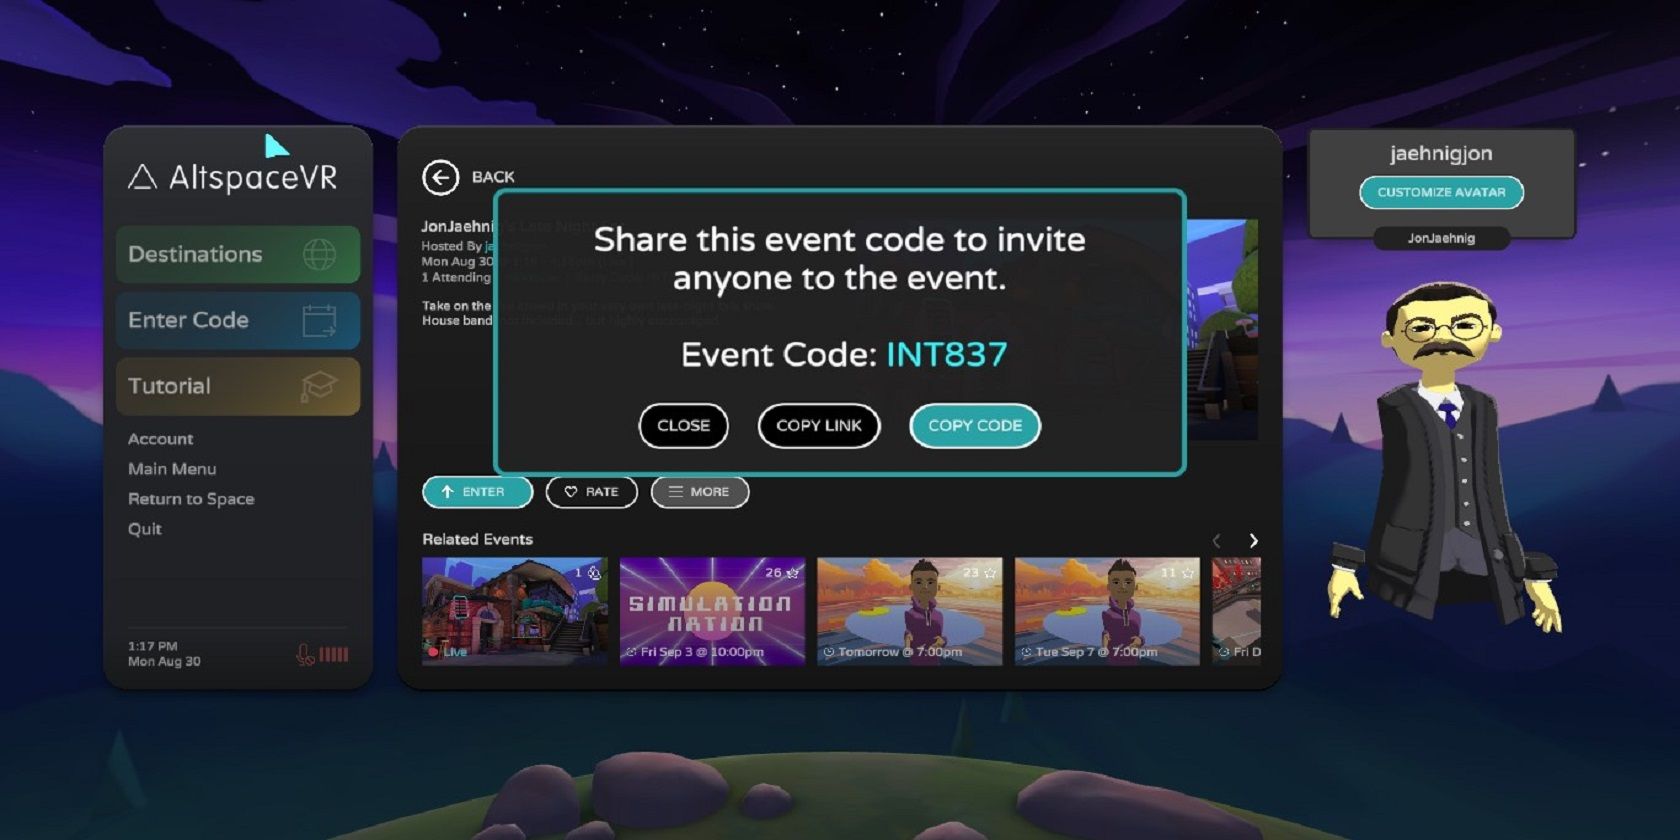 The interface for Sharing an event in AltspaceVR.